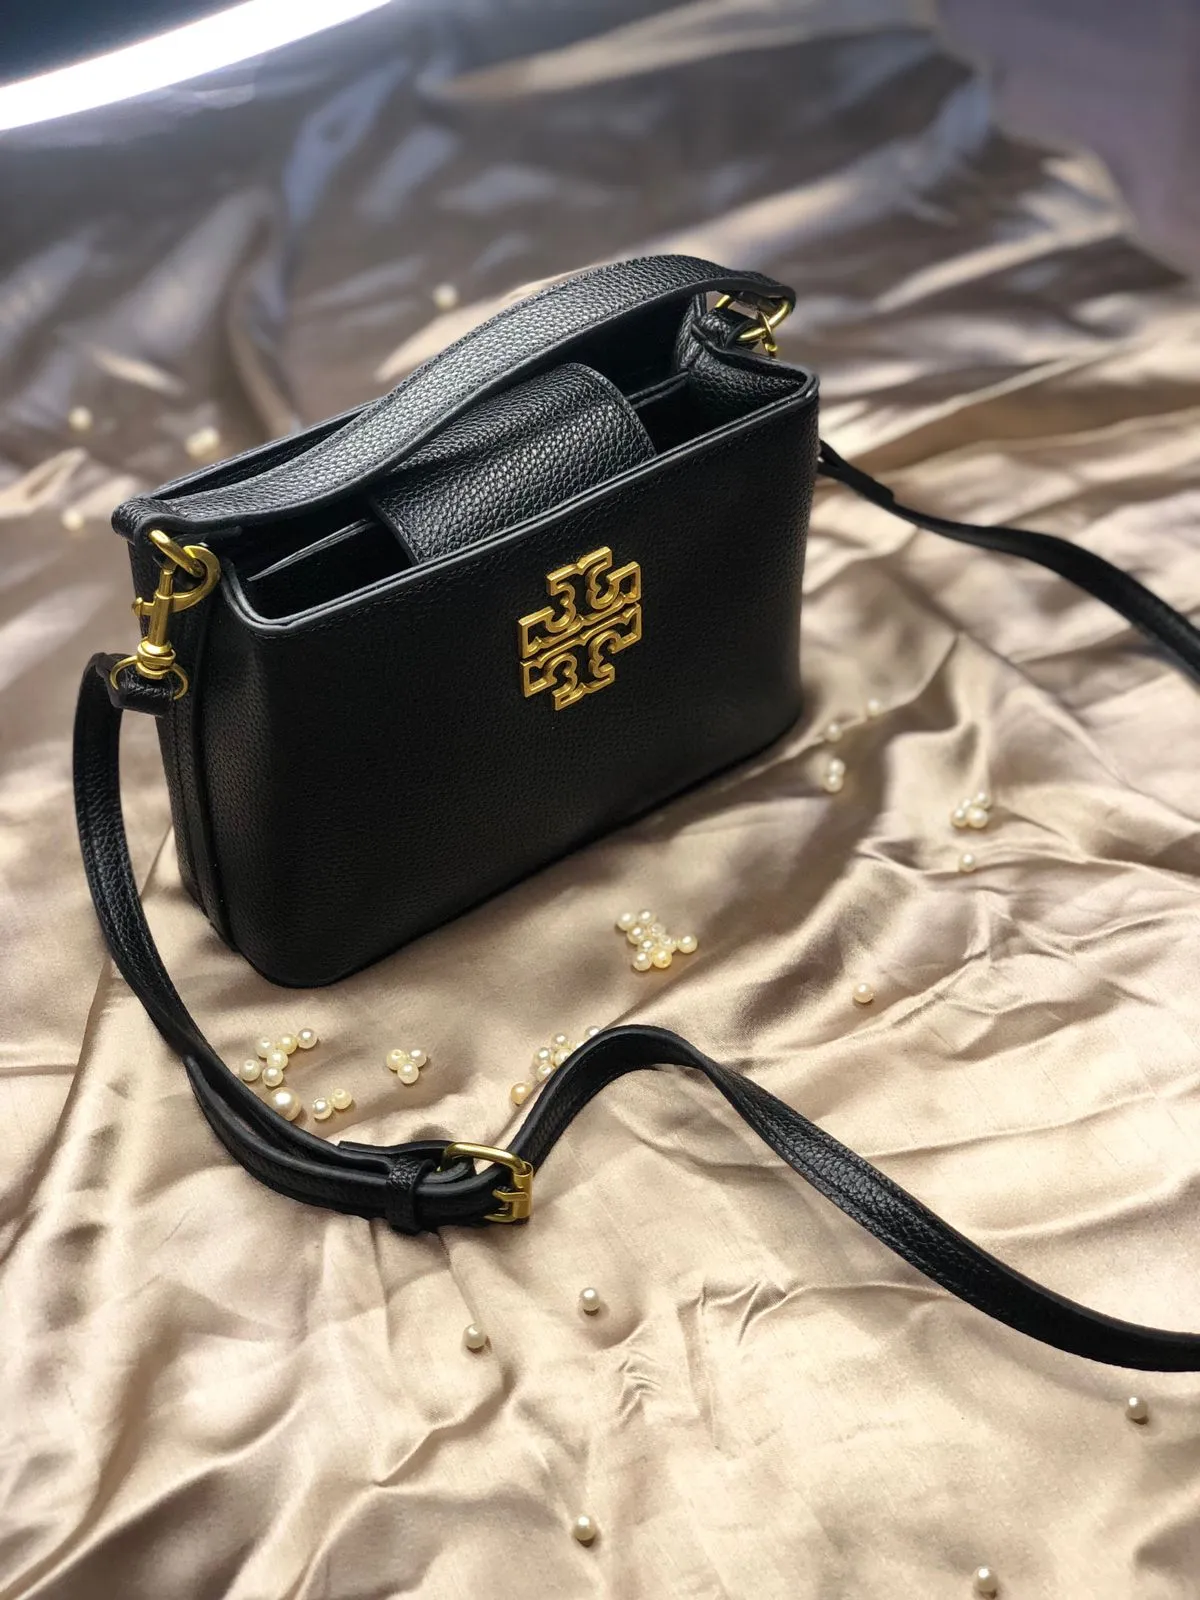 This image shows the Tory Burch Britten Micro Satchel (Black). sale on this website. #womensbag #imported #ladiesbag #bag #ToryBurchbag #mediumsizebag.6